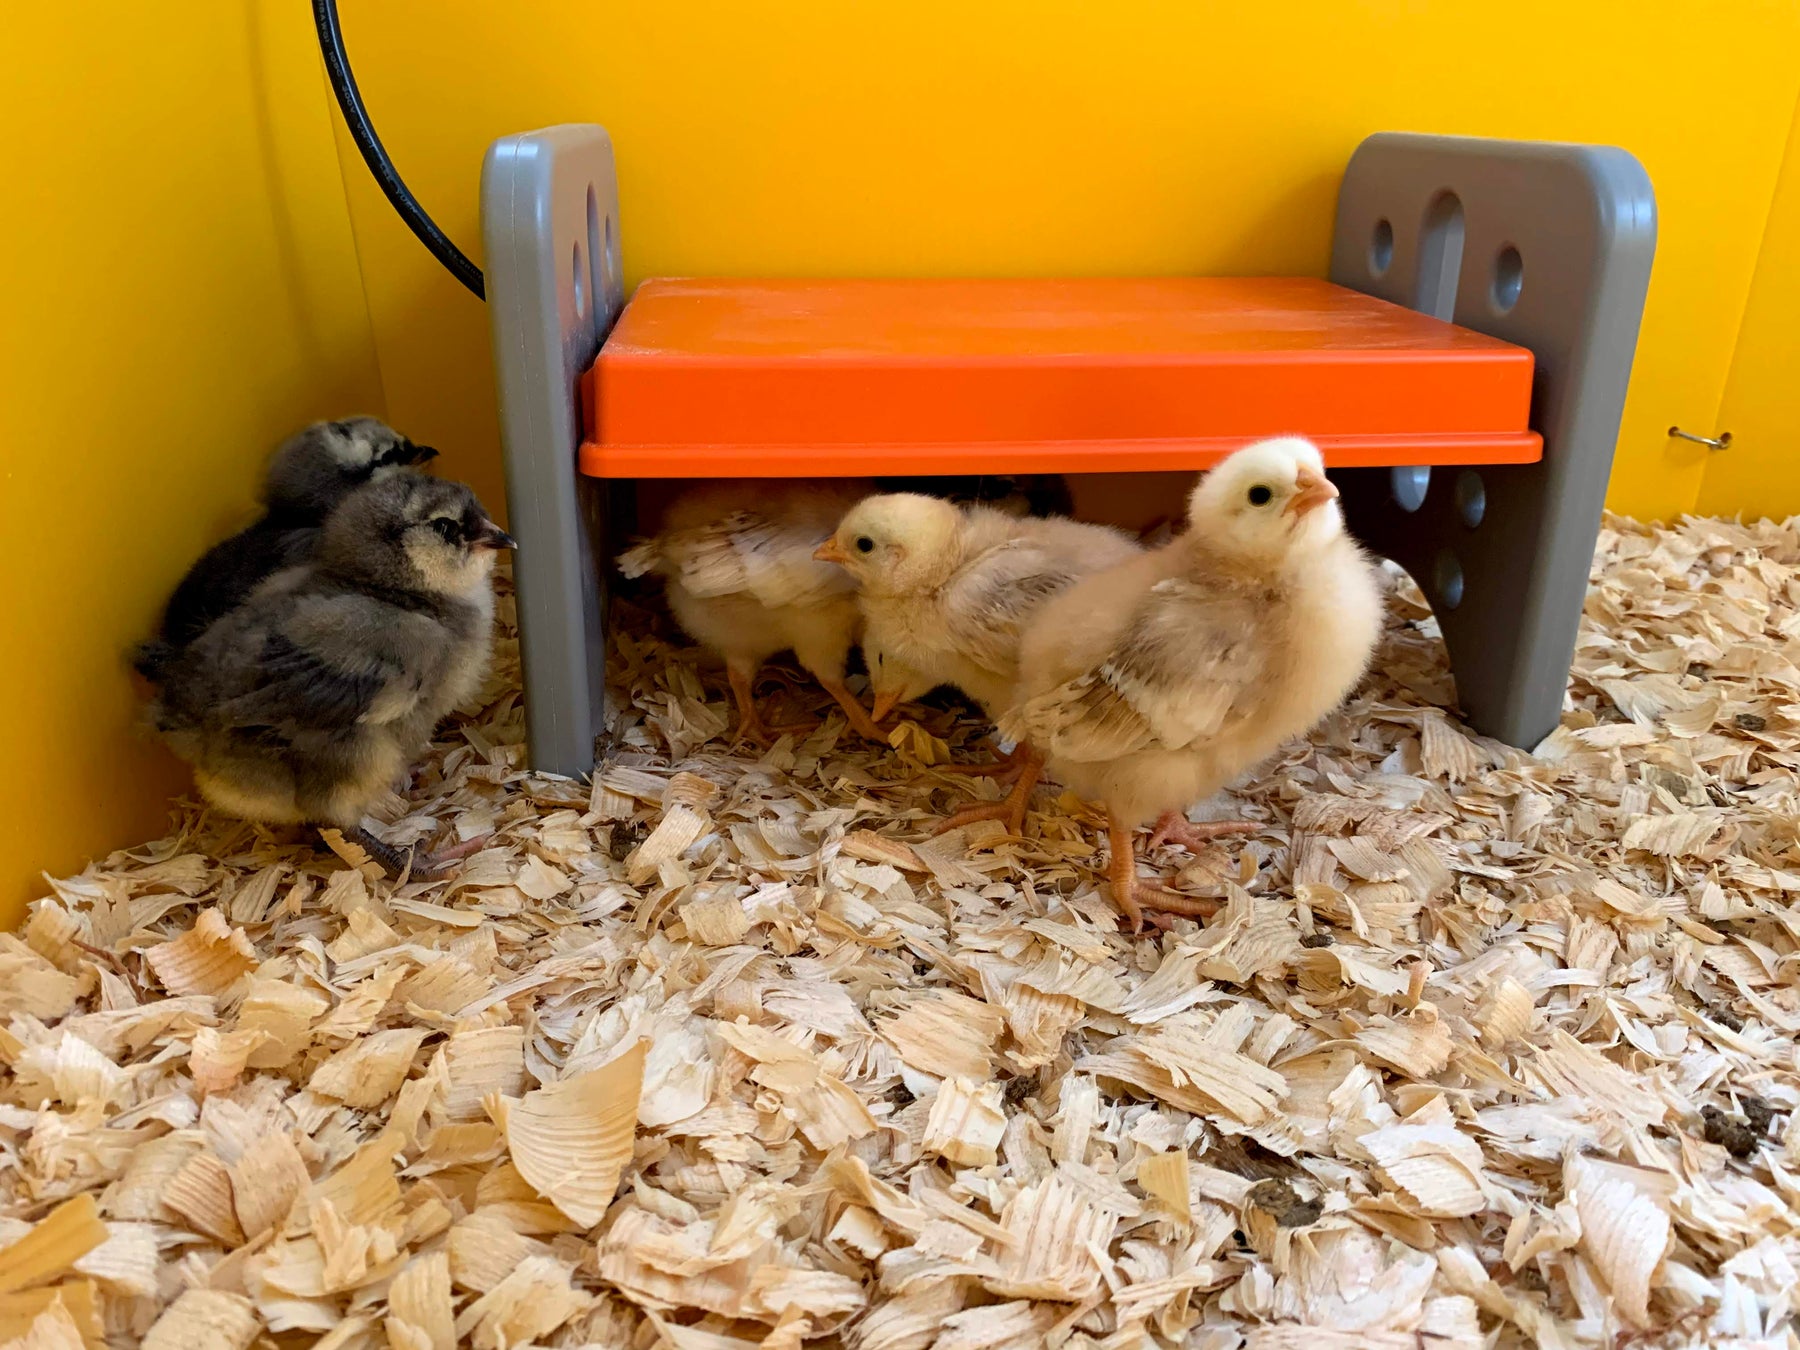 Your chicks need to stay warm, so if you're looking for an alternative to a heat lamp, here are some helpful solutions.